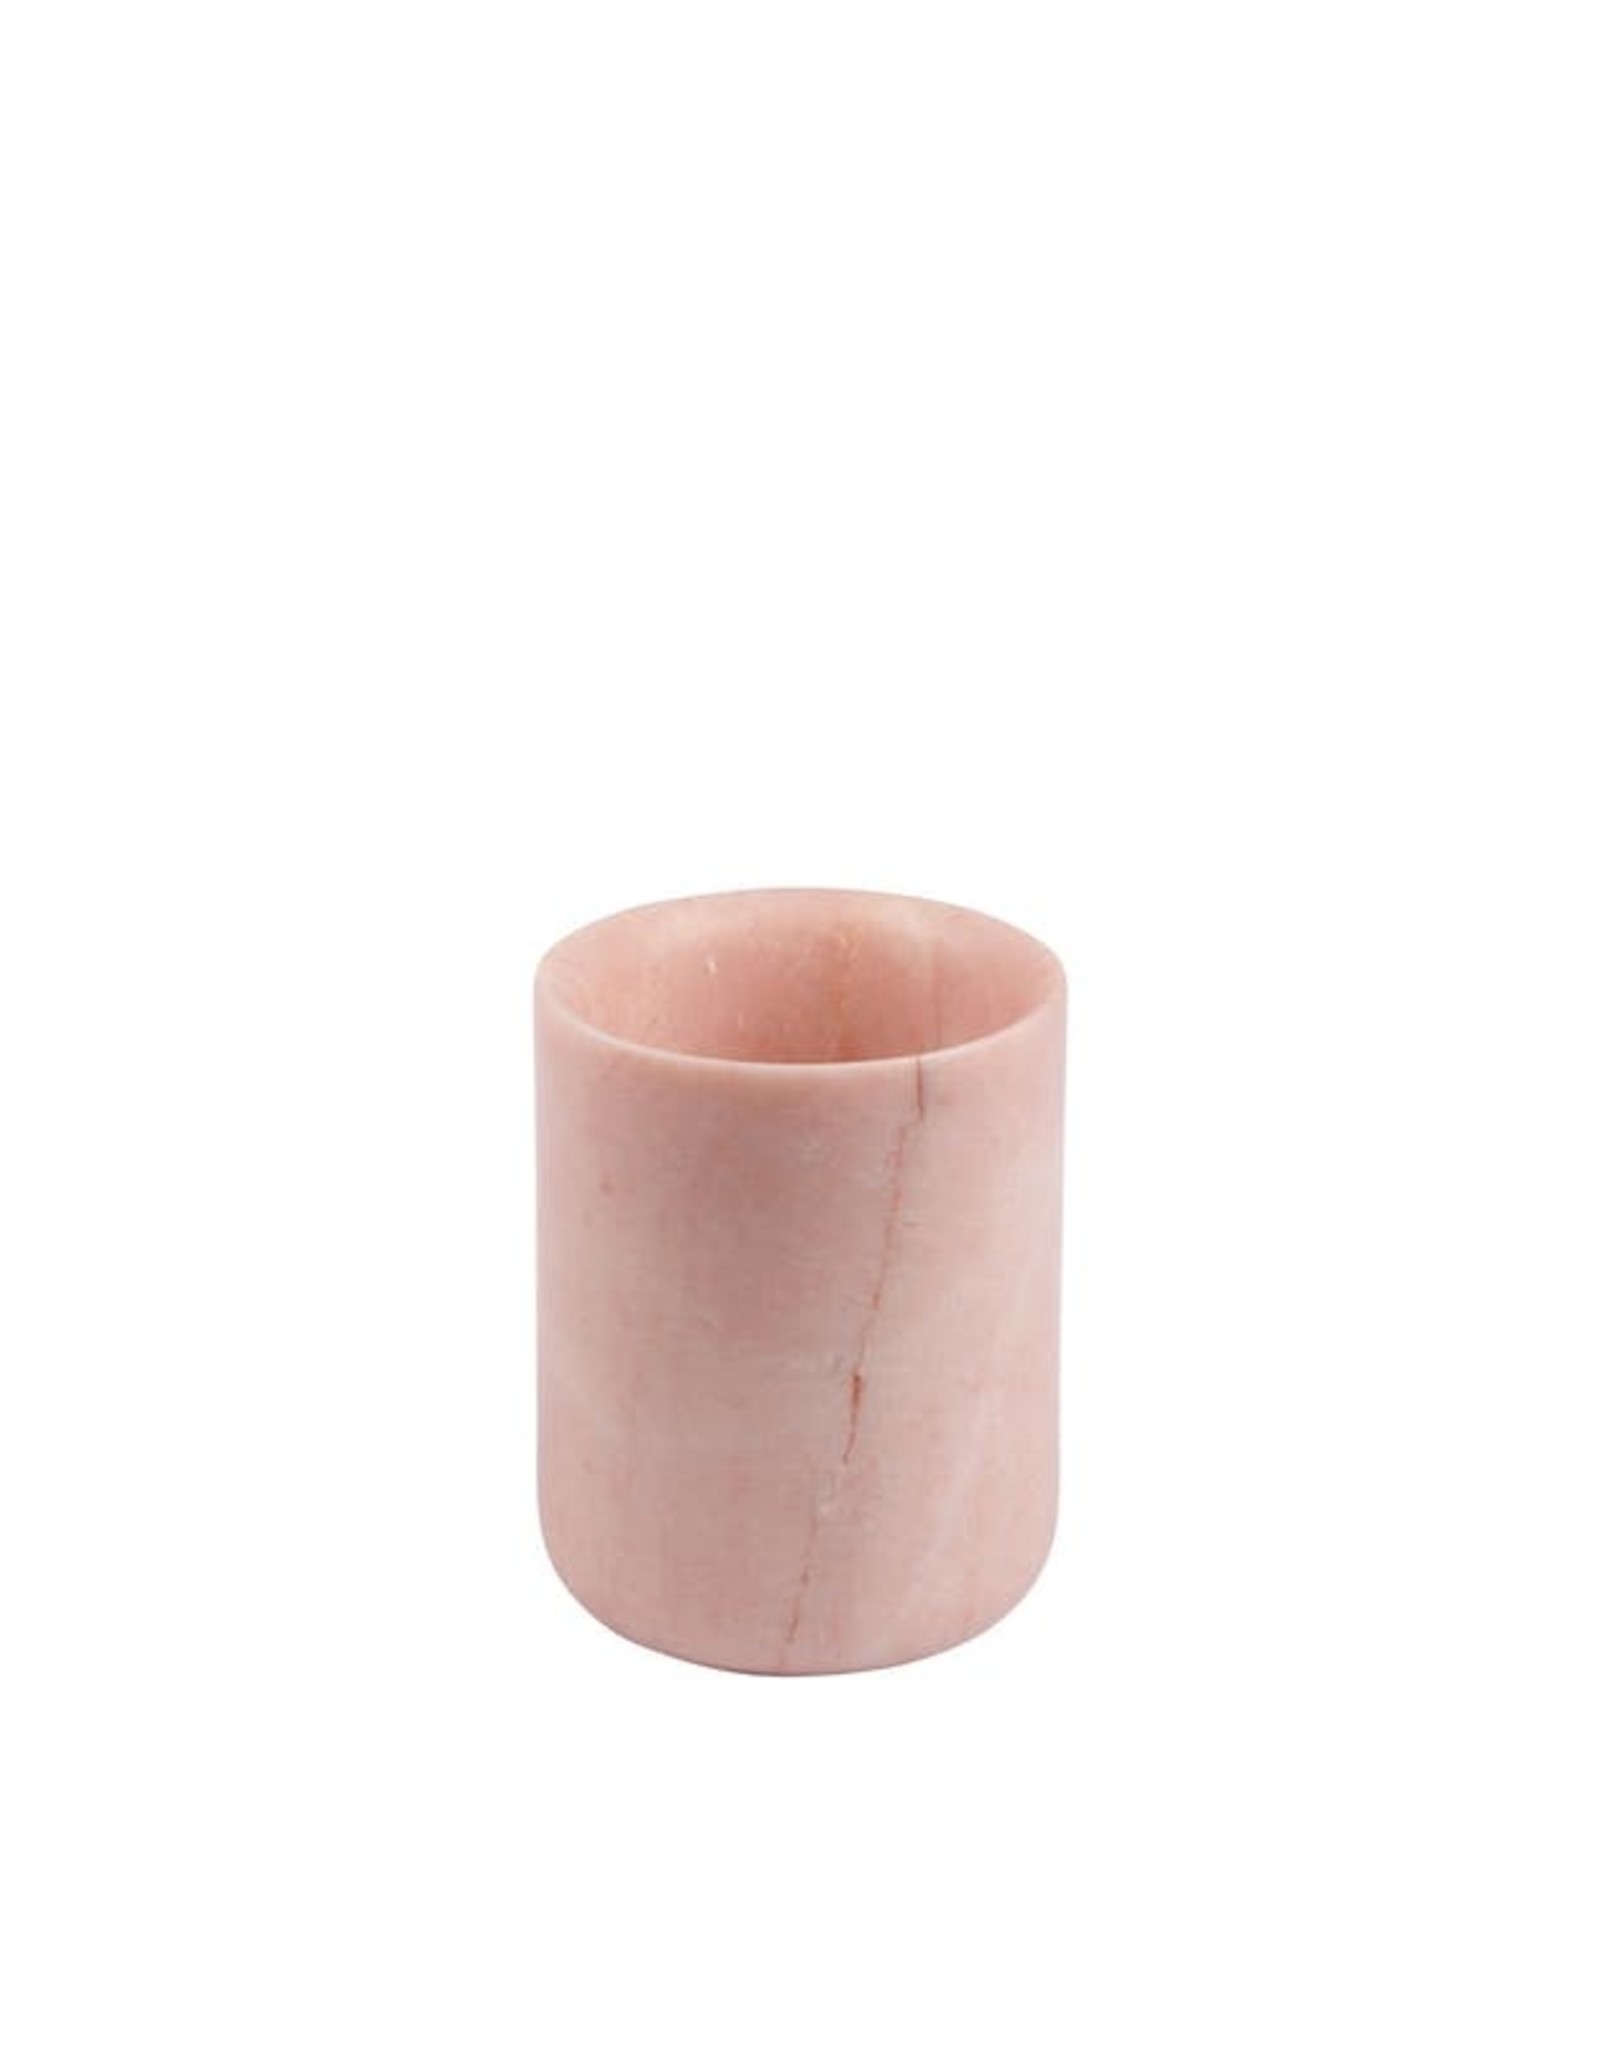 Stoned - pink toothbrush holder